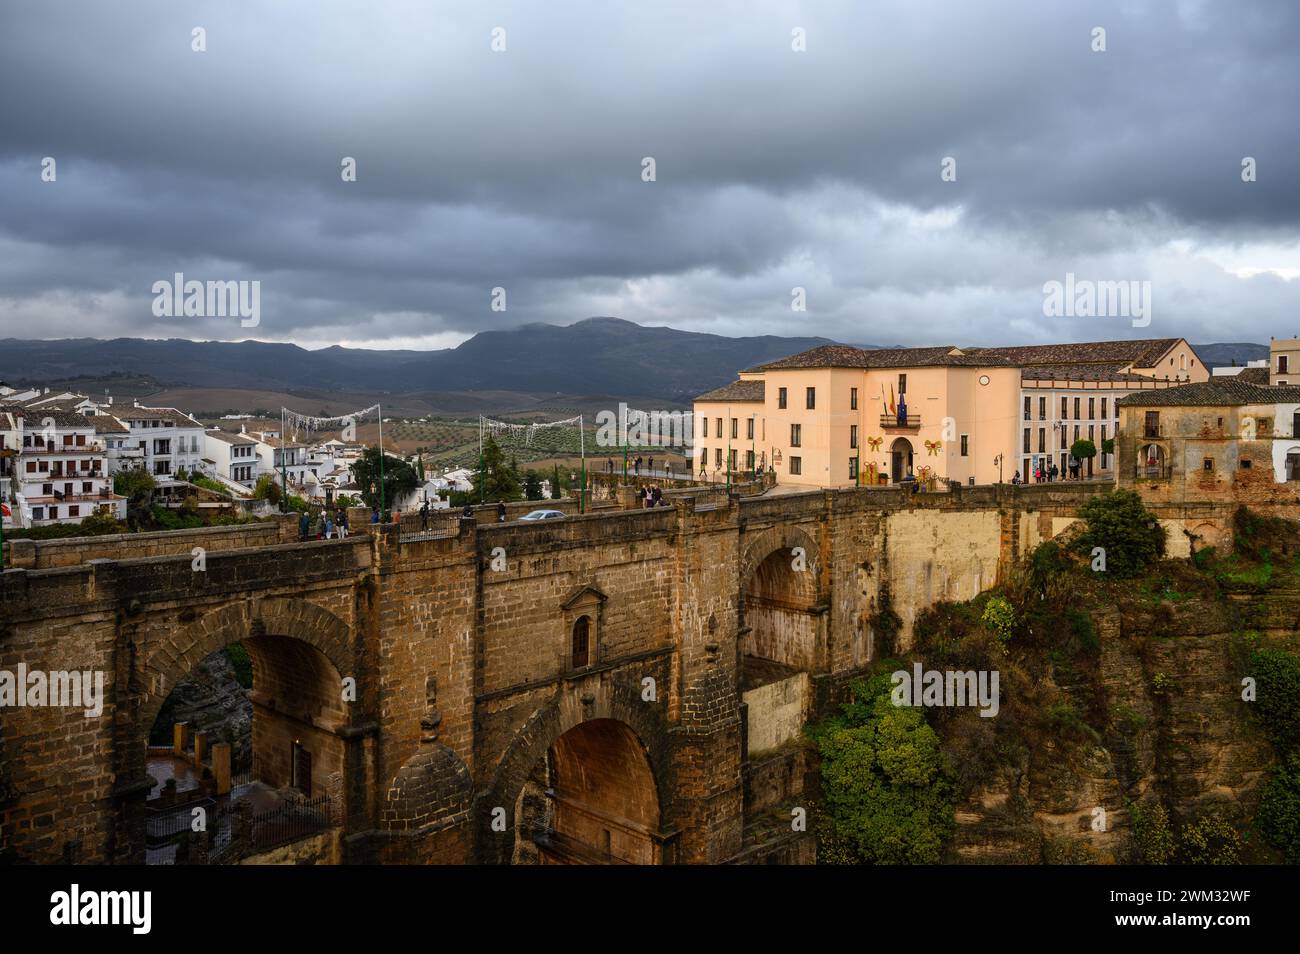 The Puente Nuevo and the old town of Ronda at sunset, Malaga, Andalucia, Spain. Stock Photo